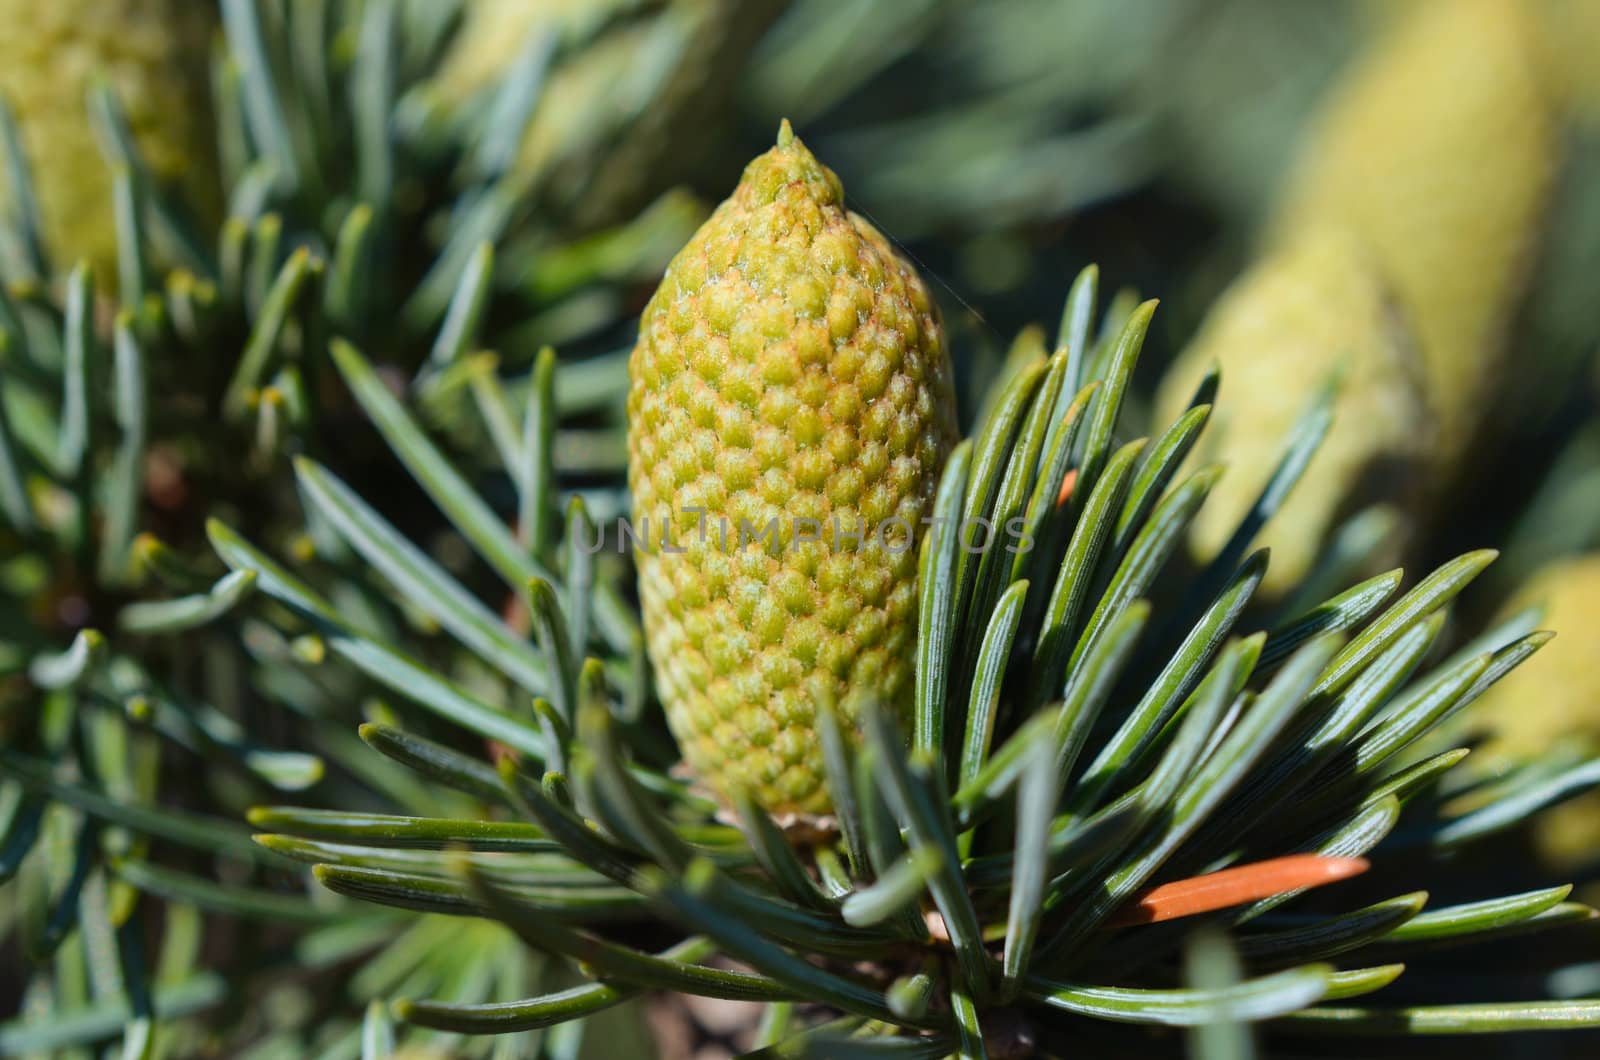 Branch of a pine with  small cones